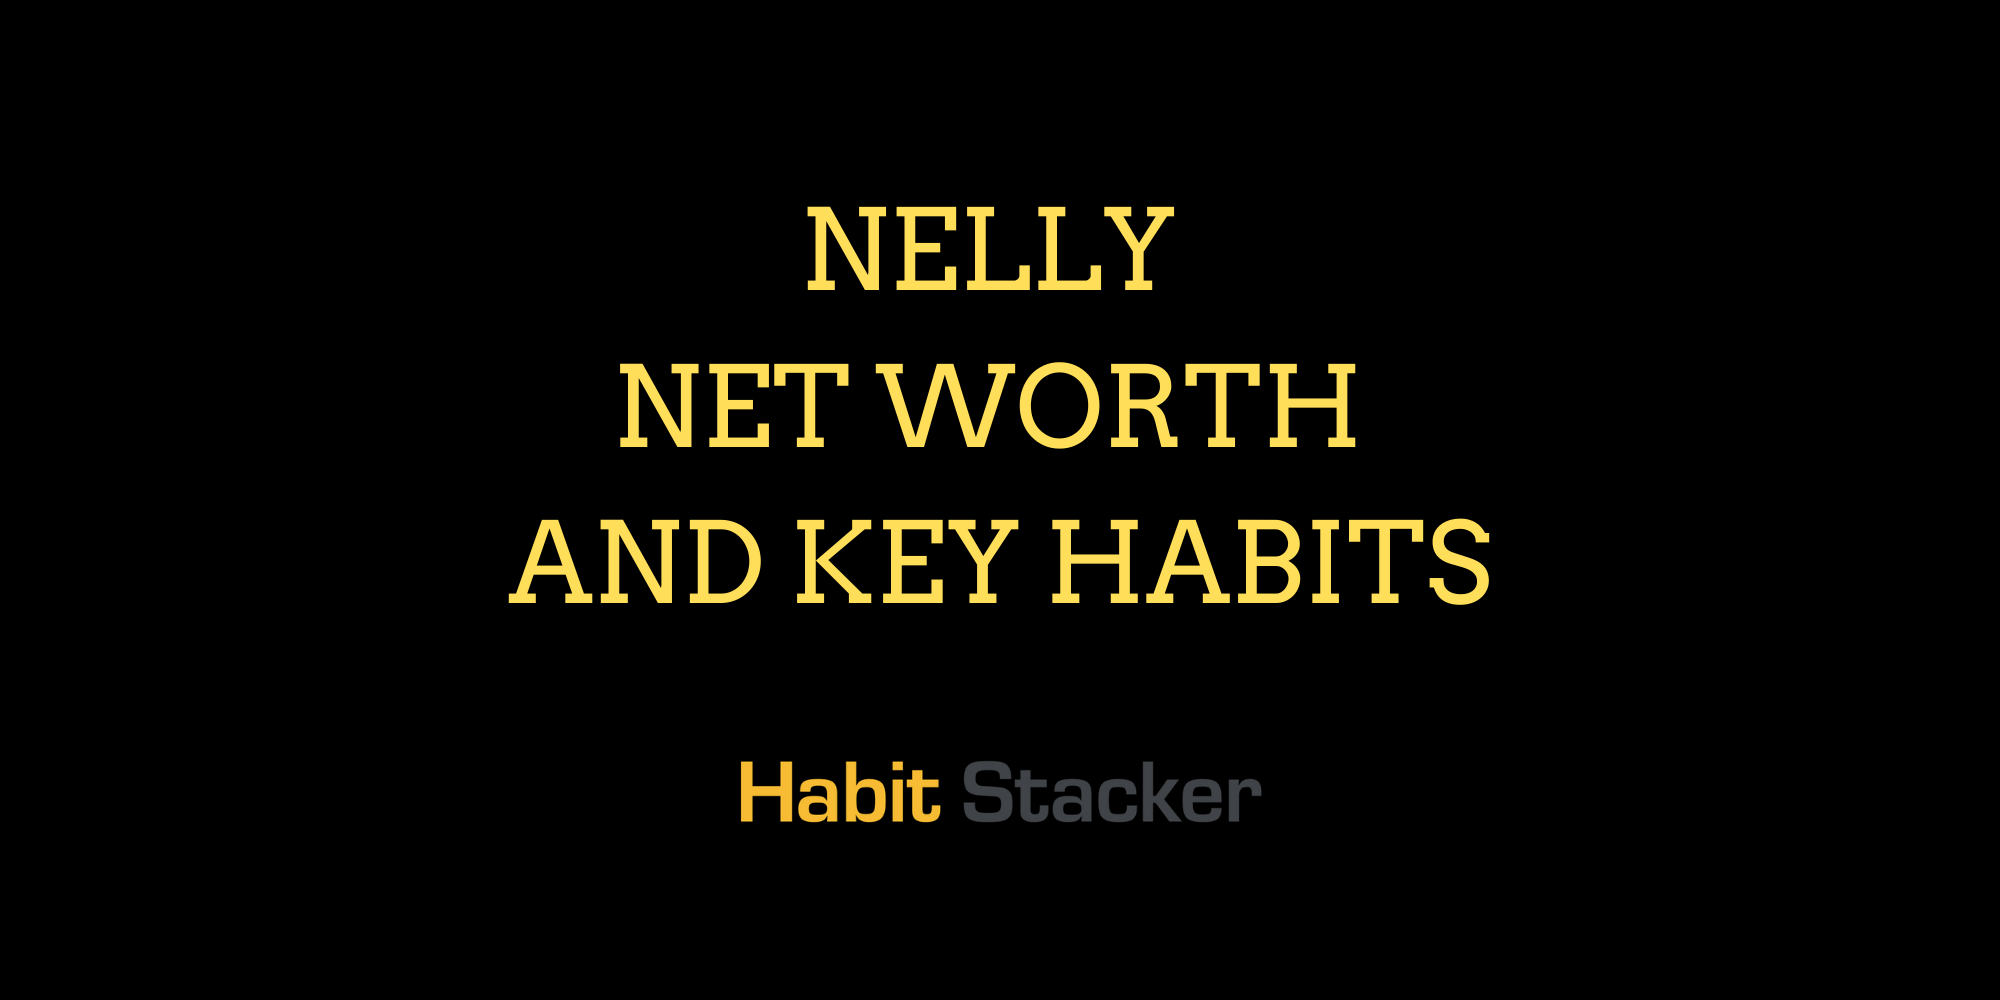 Nelly Net Worth and Key Habits